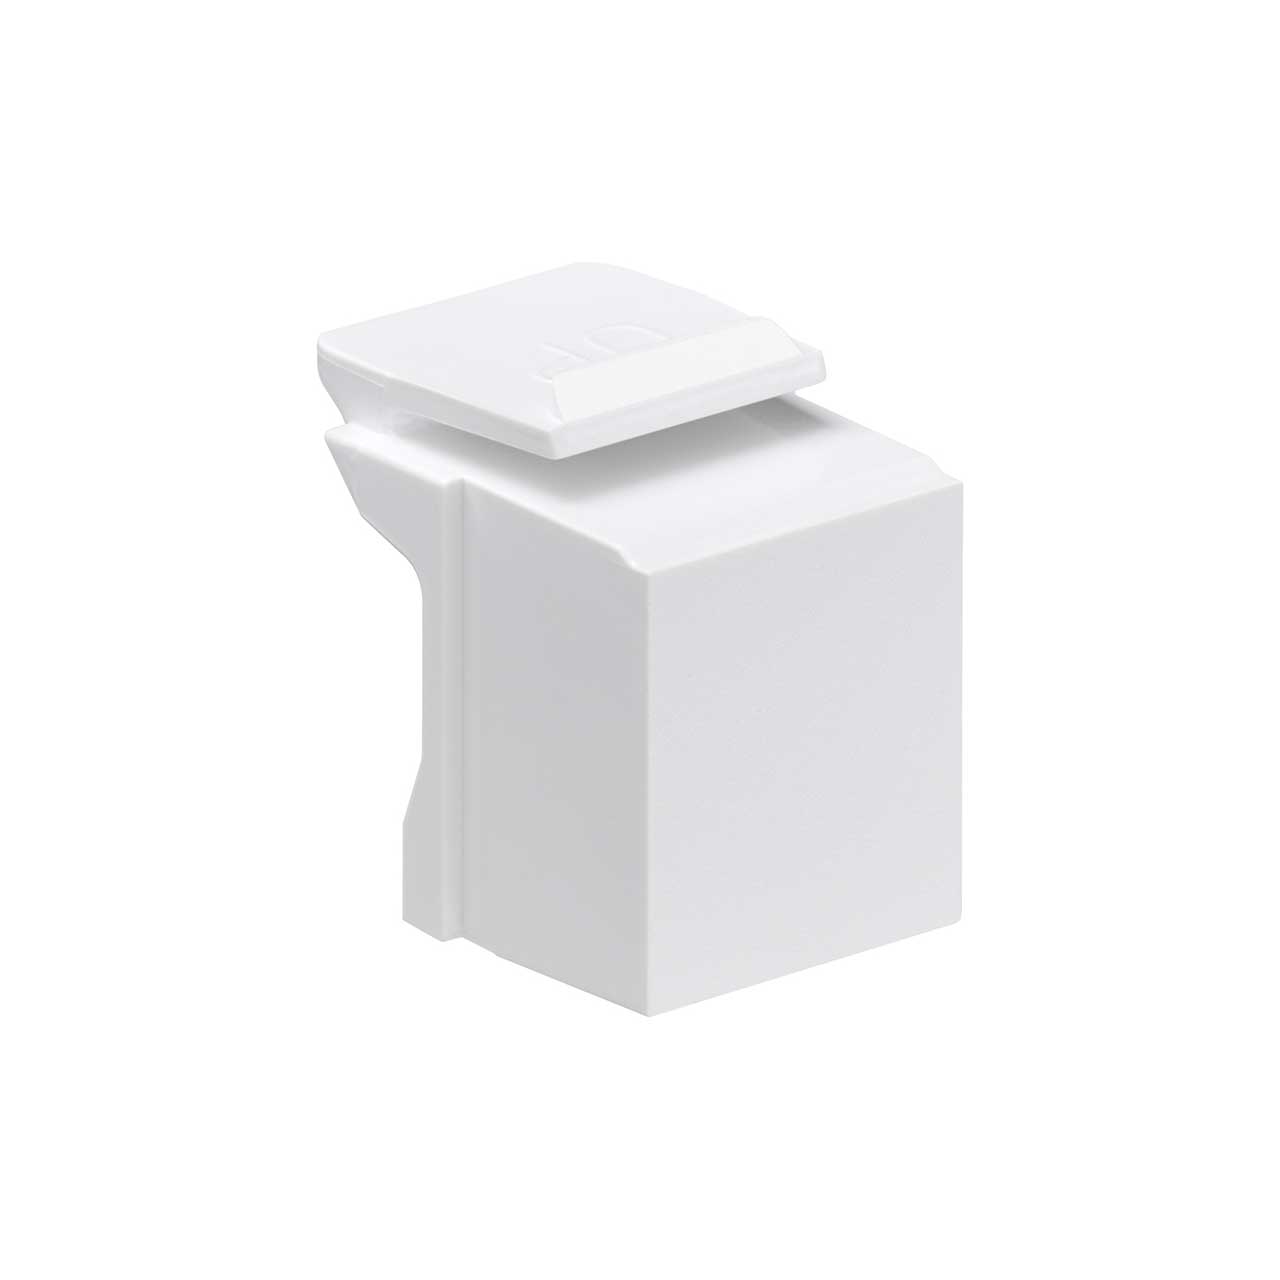 Leviton 41084-BW Blank QuickPort Insert - White - Pack of 10 LEV-41084-BW